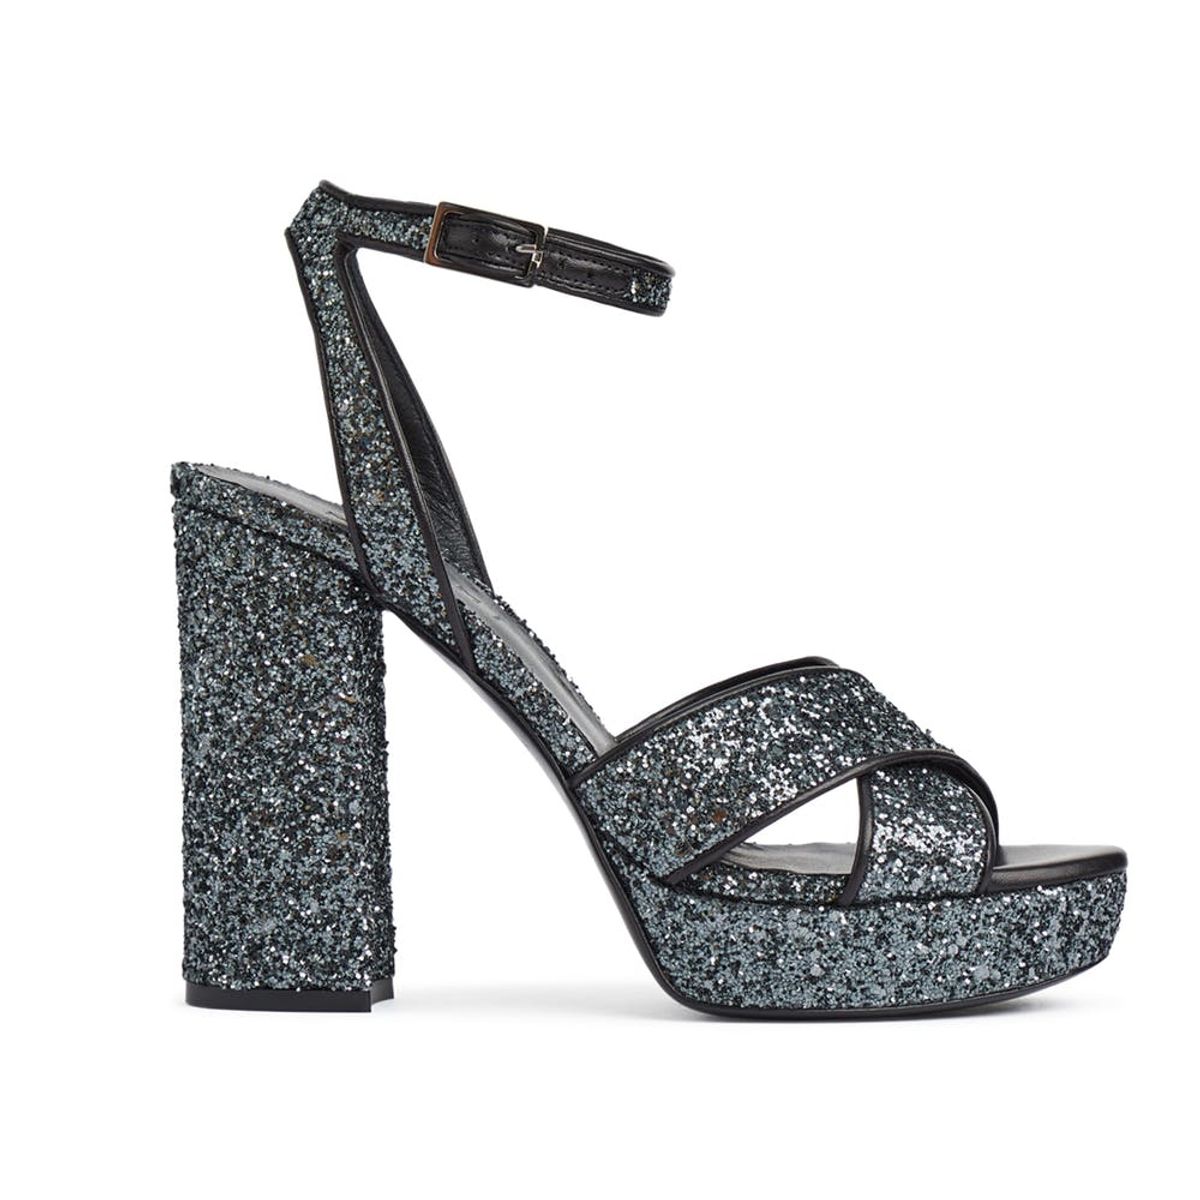 10 Glittery Shoes to Add Sparkle to Every Holiday Look